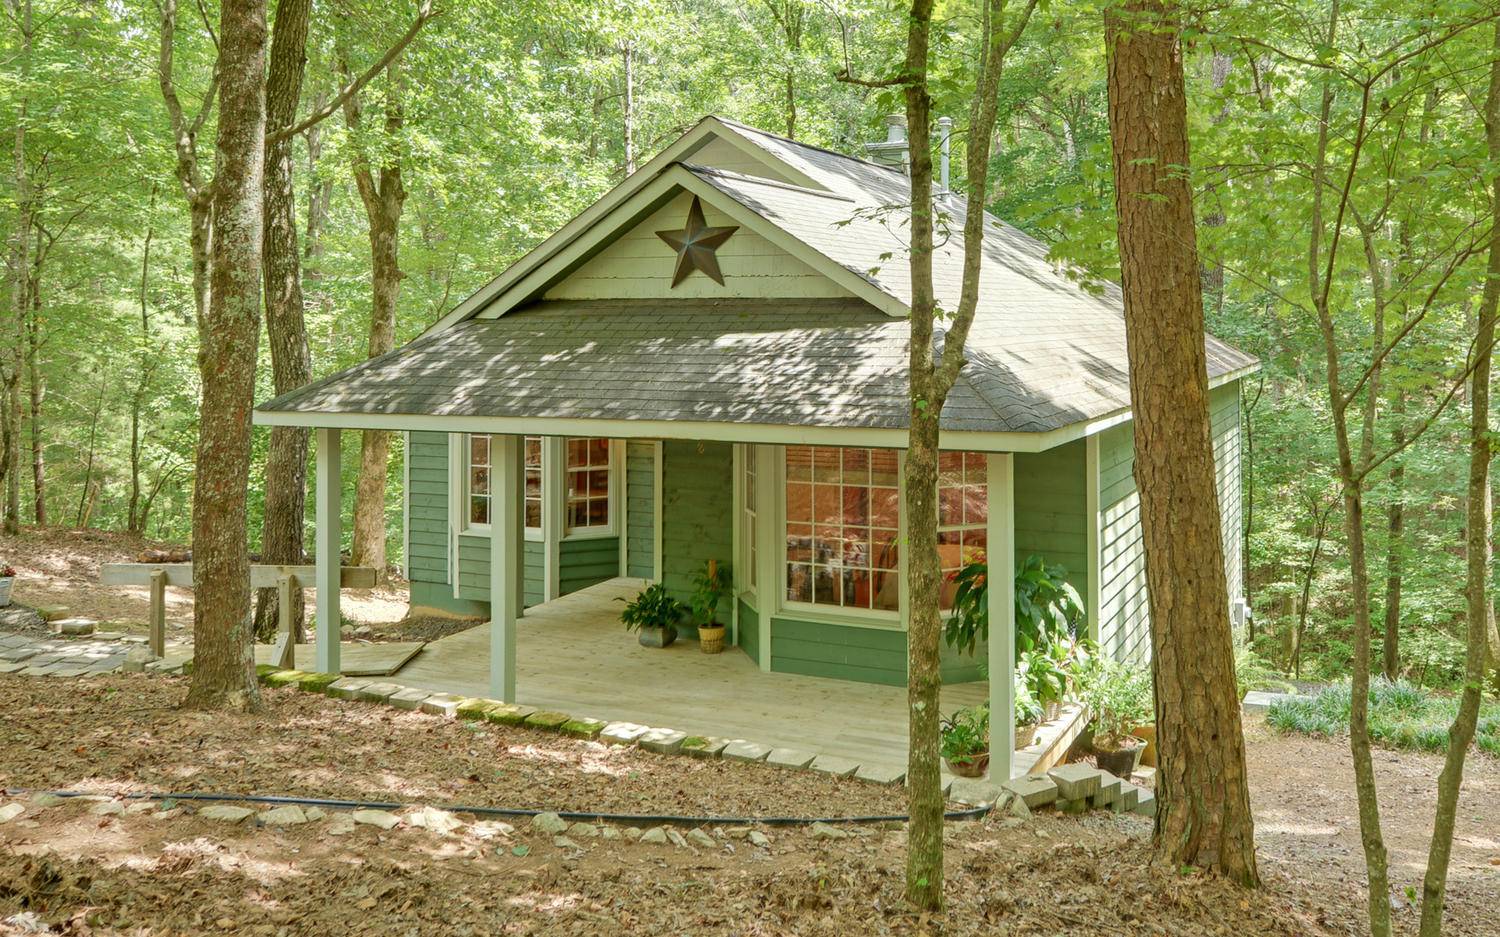 Enchanting Mountain Get-Away~ This FULLY FURNISHED 2/2 Cottage BLACKBERRY STREAM is a Dream to Mountain Lovers and River Lovers alike~ Just Moments to the Shoals on Clear Creek and Ellijay's WINE COUNTRY~ Currently an AIRBNB with a Great RENTAL HISTORY~ This Cabin on a Noisy Stream Offers a Charming Open Floor Plan- Main Level Offers 2 Bedrooms /1 Bath~ Eat In Kitchen/Dining Area and Living Room with Gas Log Fireplace plus Deck Overlooking the Stream! The Terrace Level Includes 2nd Full Bath/Partial Finished 3rd Bedroom/Office-Laundry Area and a Large Unfinished Space to make a Fantastic Entertainment or Family Room- So Many Great Possibilities! The Generous Lot Includes both sides of the Stream with a Lovely Fire Pit Area and So Much Peace and Tranquility ~ Loads of Parking and Just Minutes to Town.